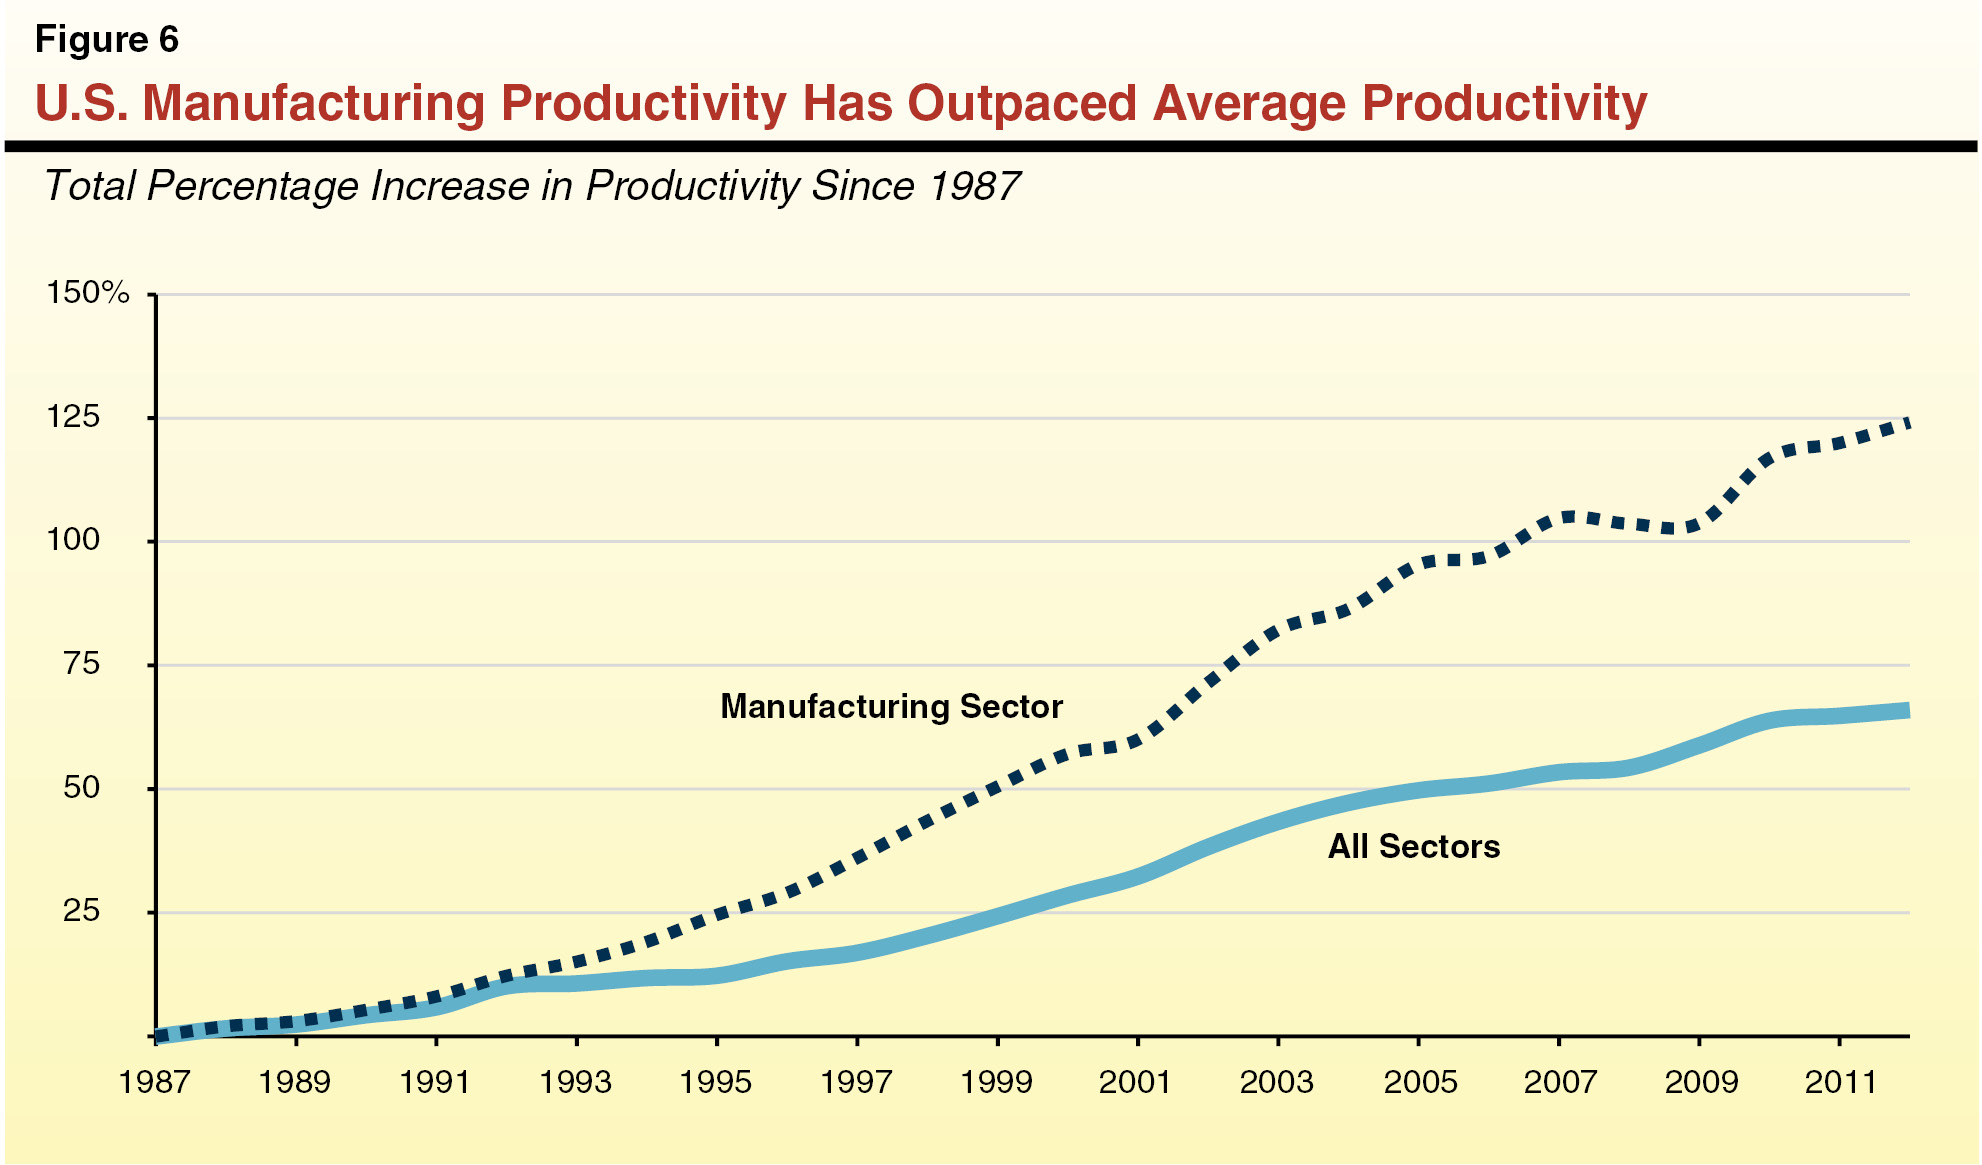 U.S. Manufacturing Productivity has Outpaced Average Productivity